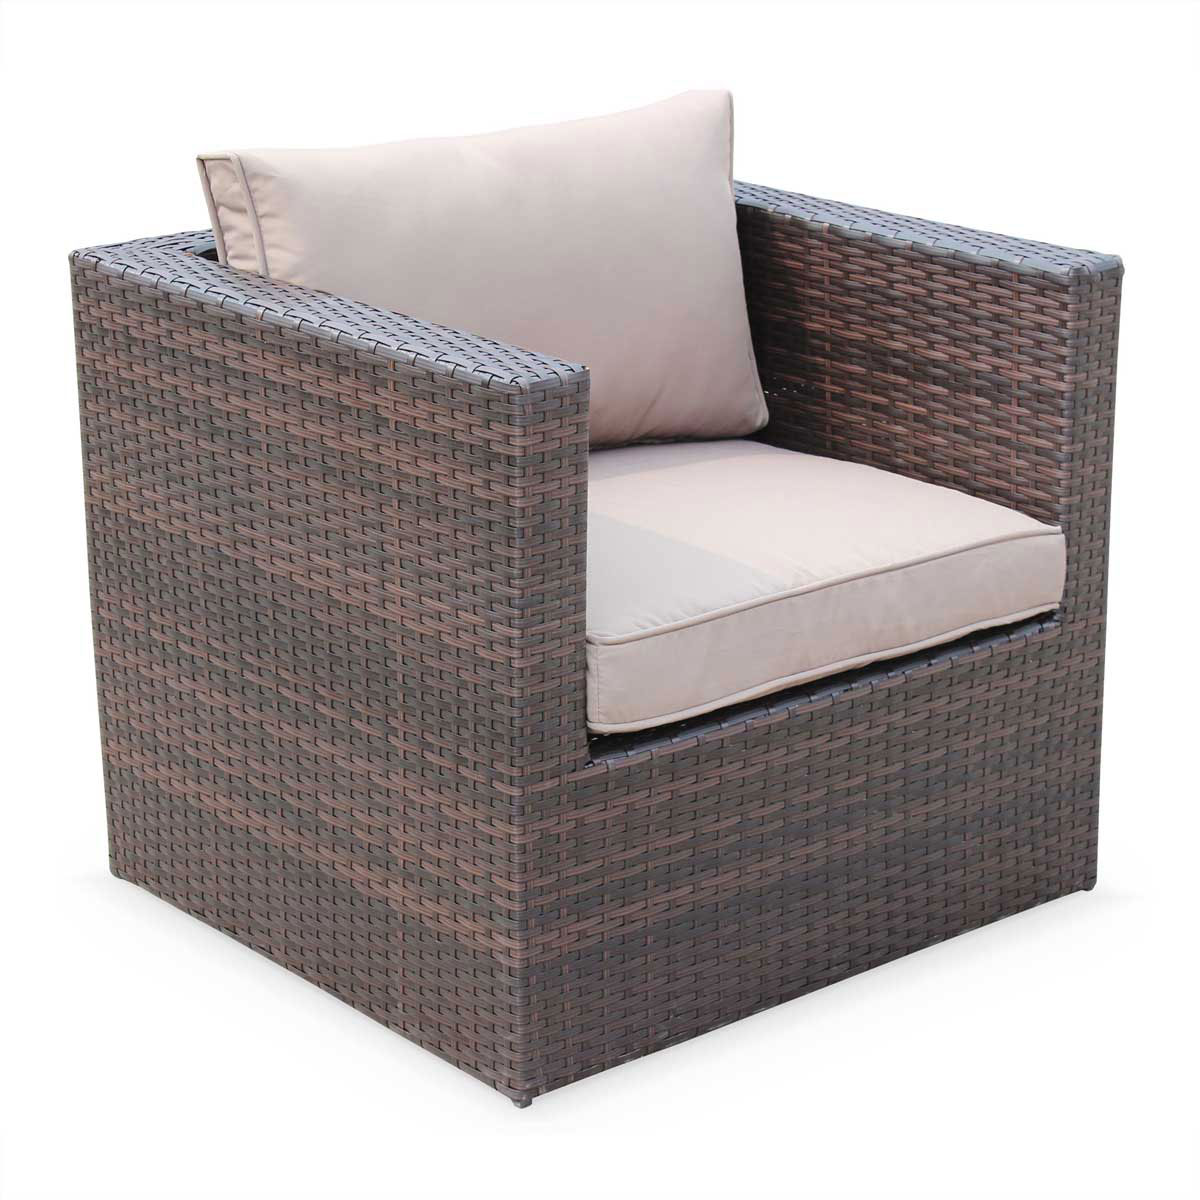 BENITO 5 Seater Outdoor Lounge Set | Brown Wicker | Brown Cushions | Aluminium Frames